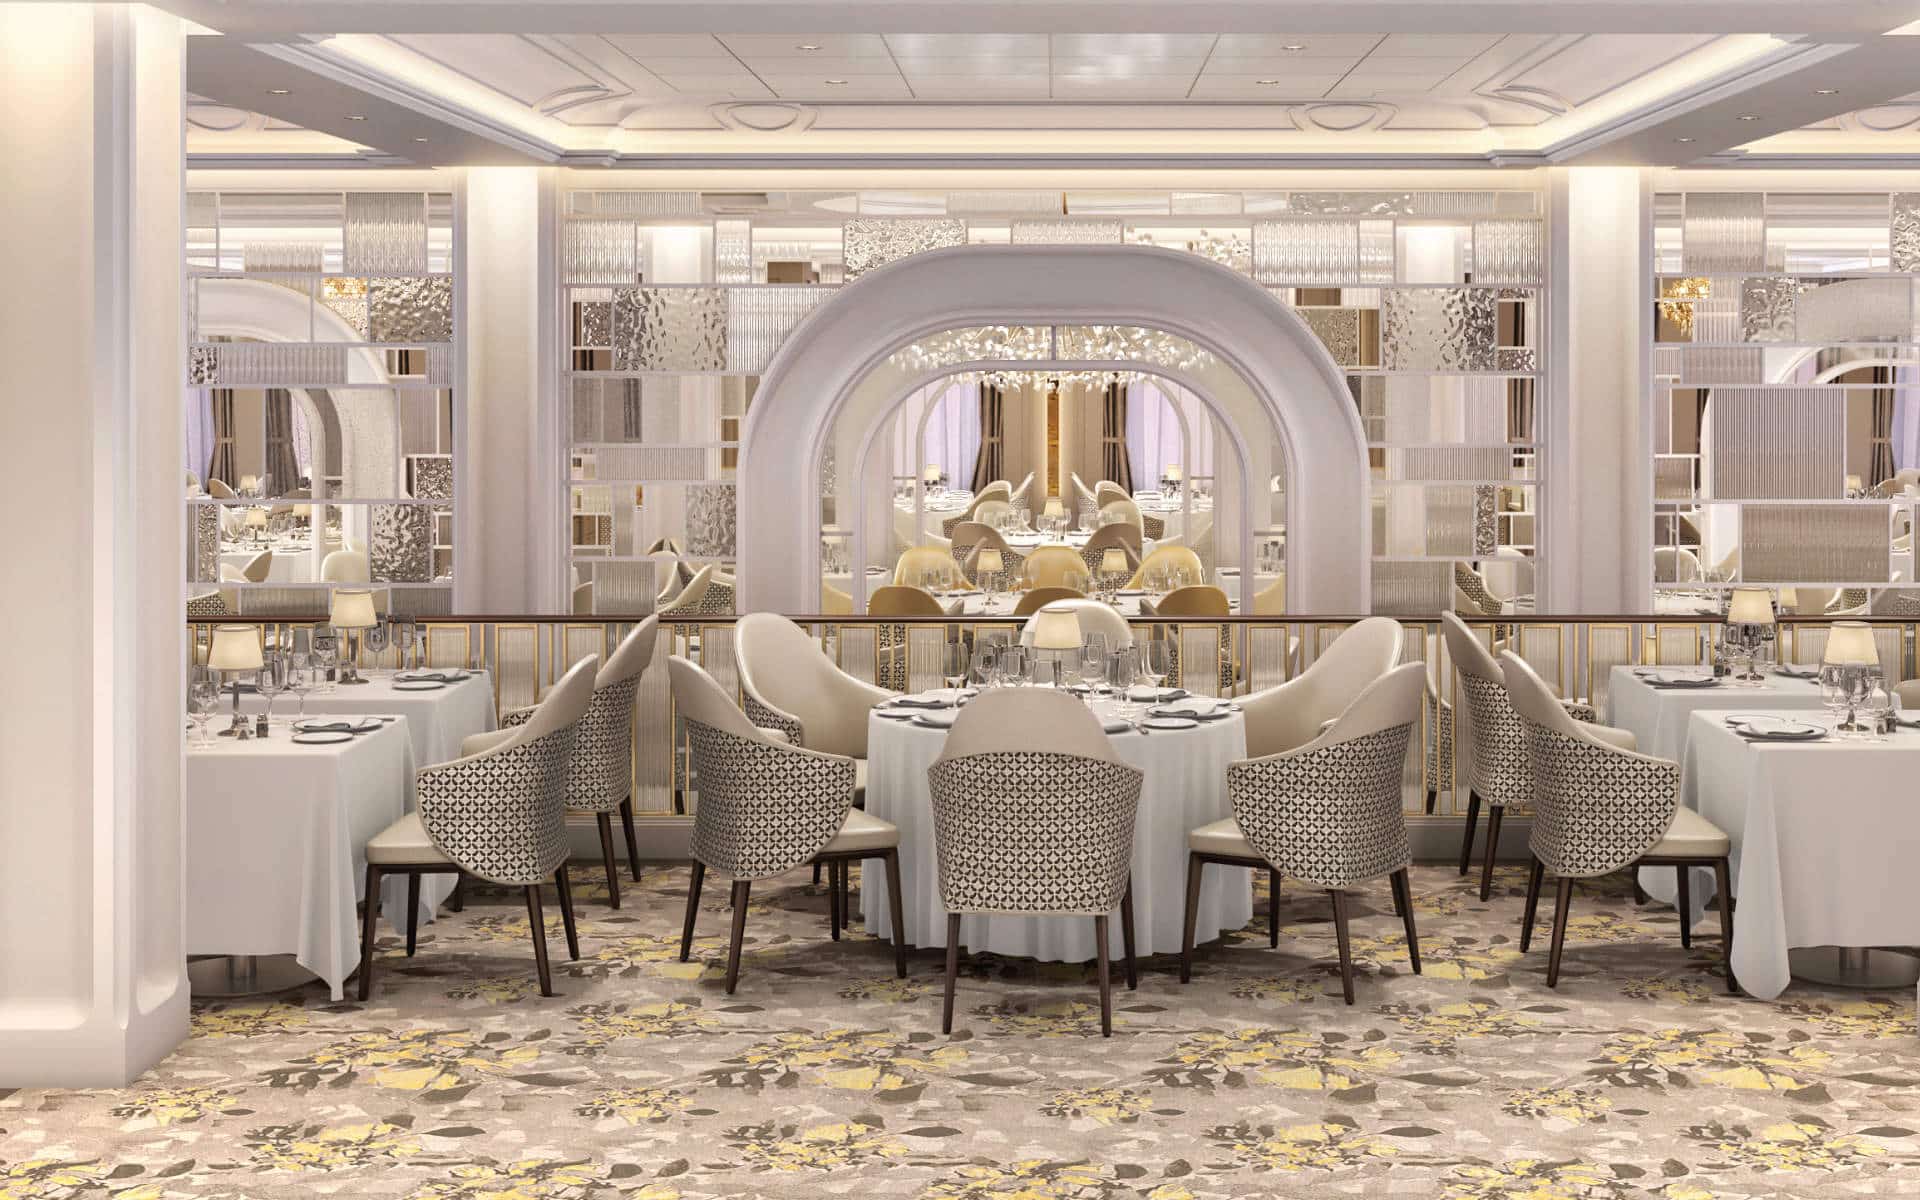 The Grand Dining Room will be re-imagined on Oceania Vista (rendering).